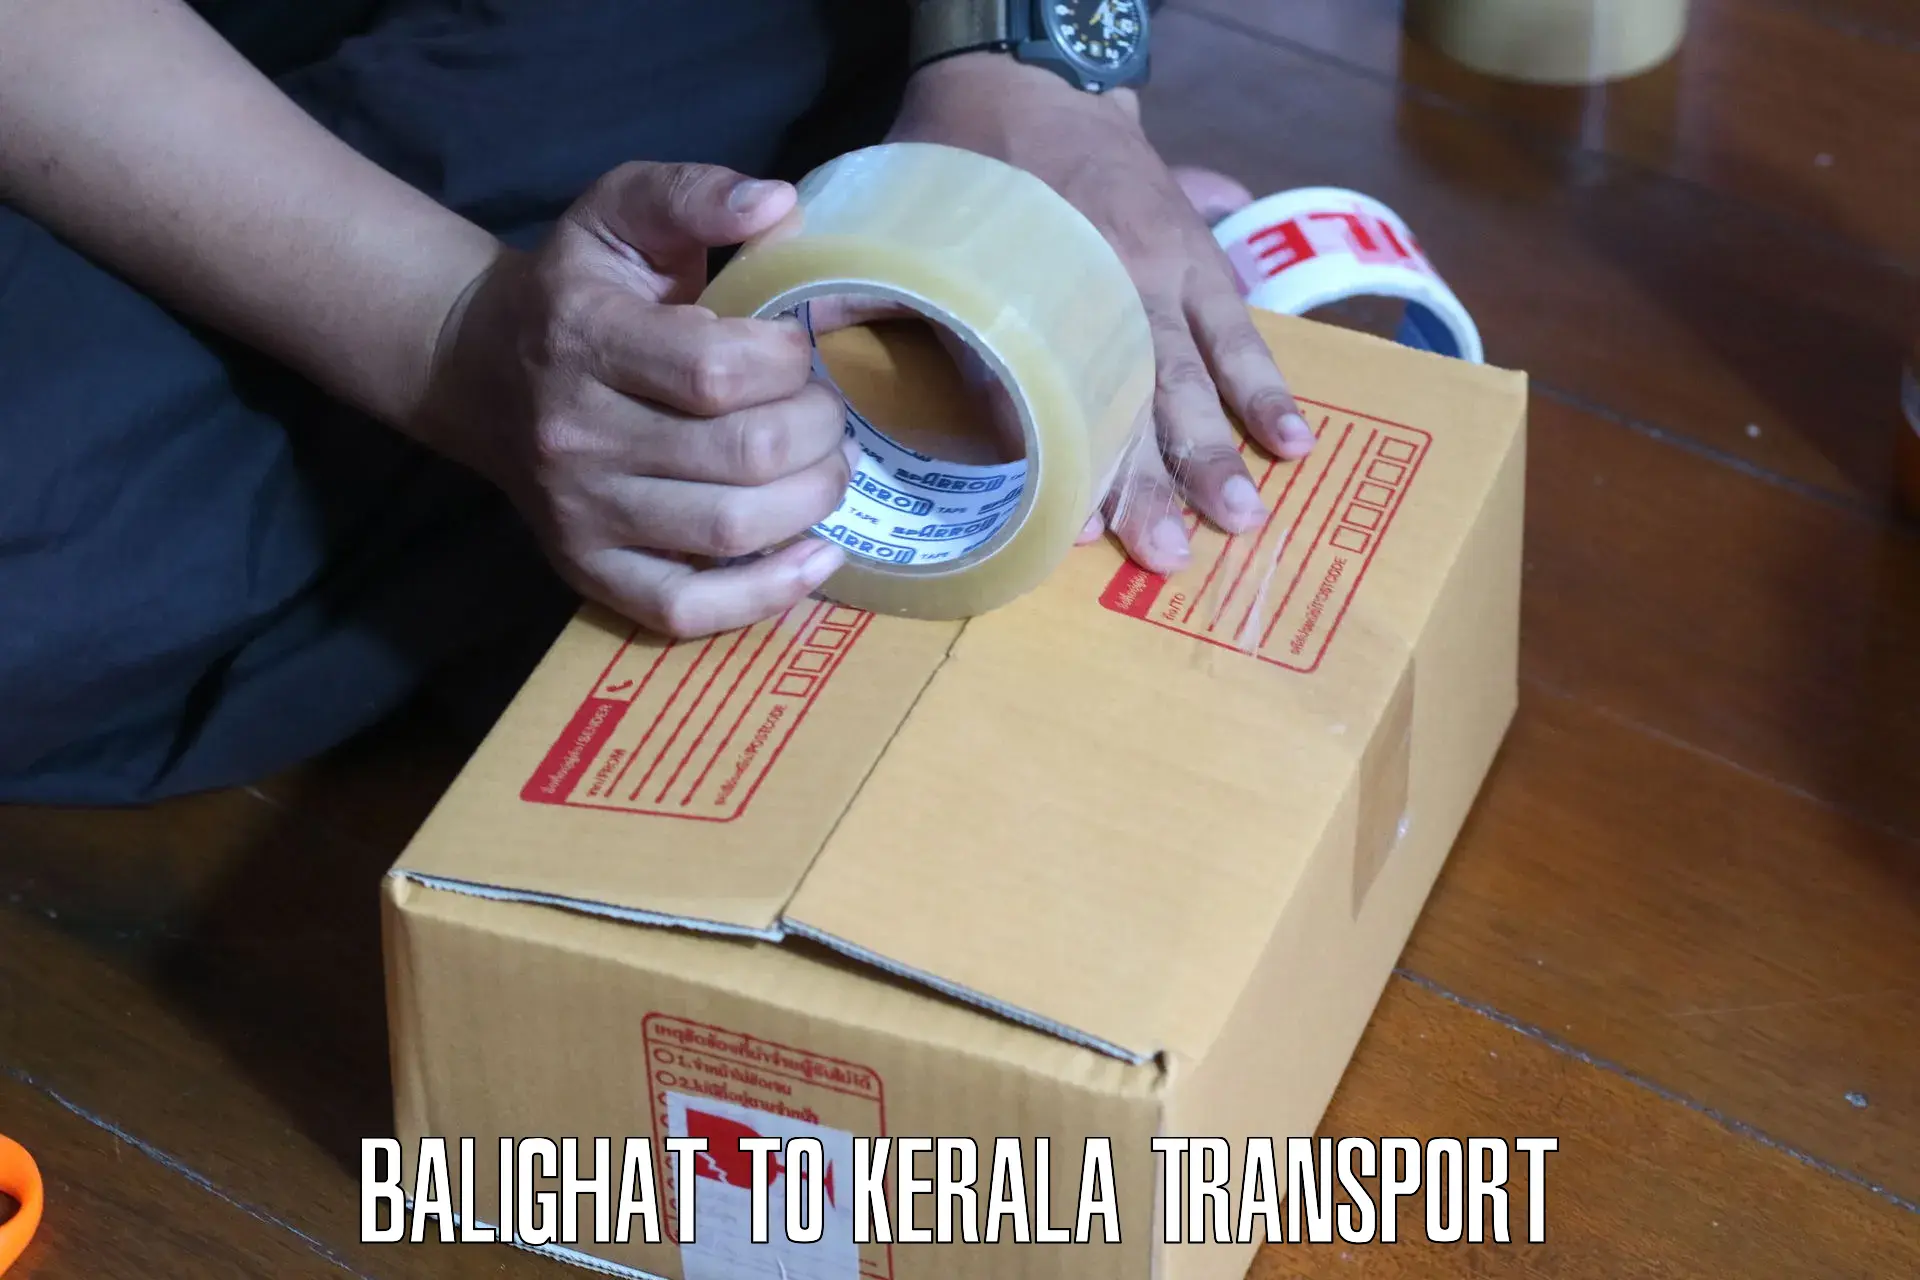 Delivery service Balighat to Kerala